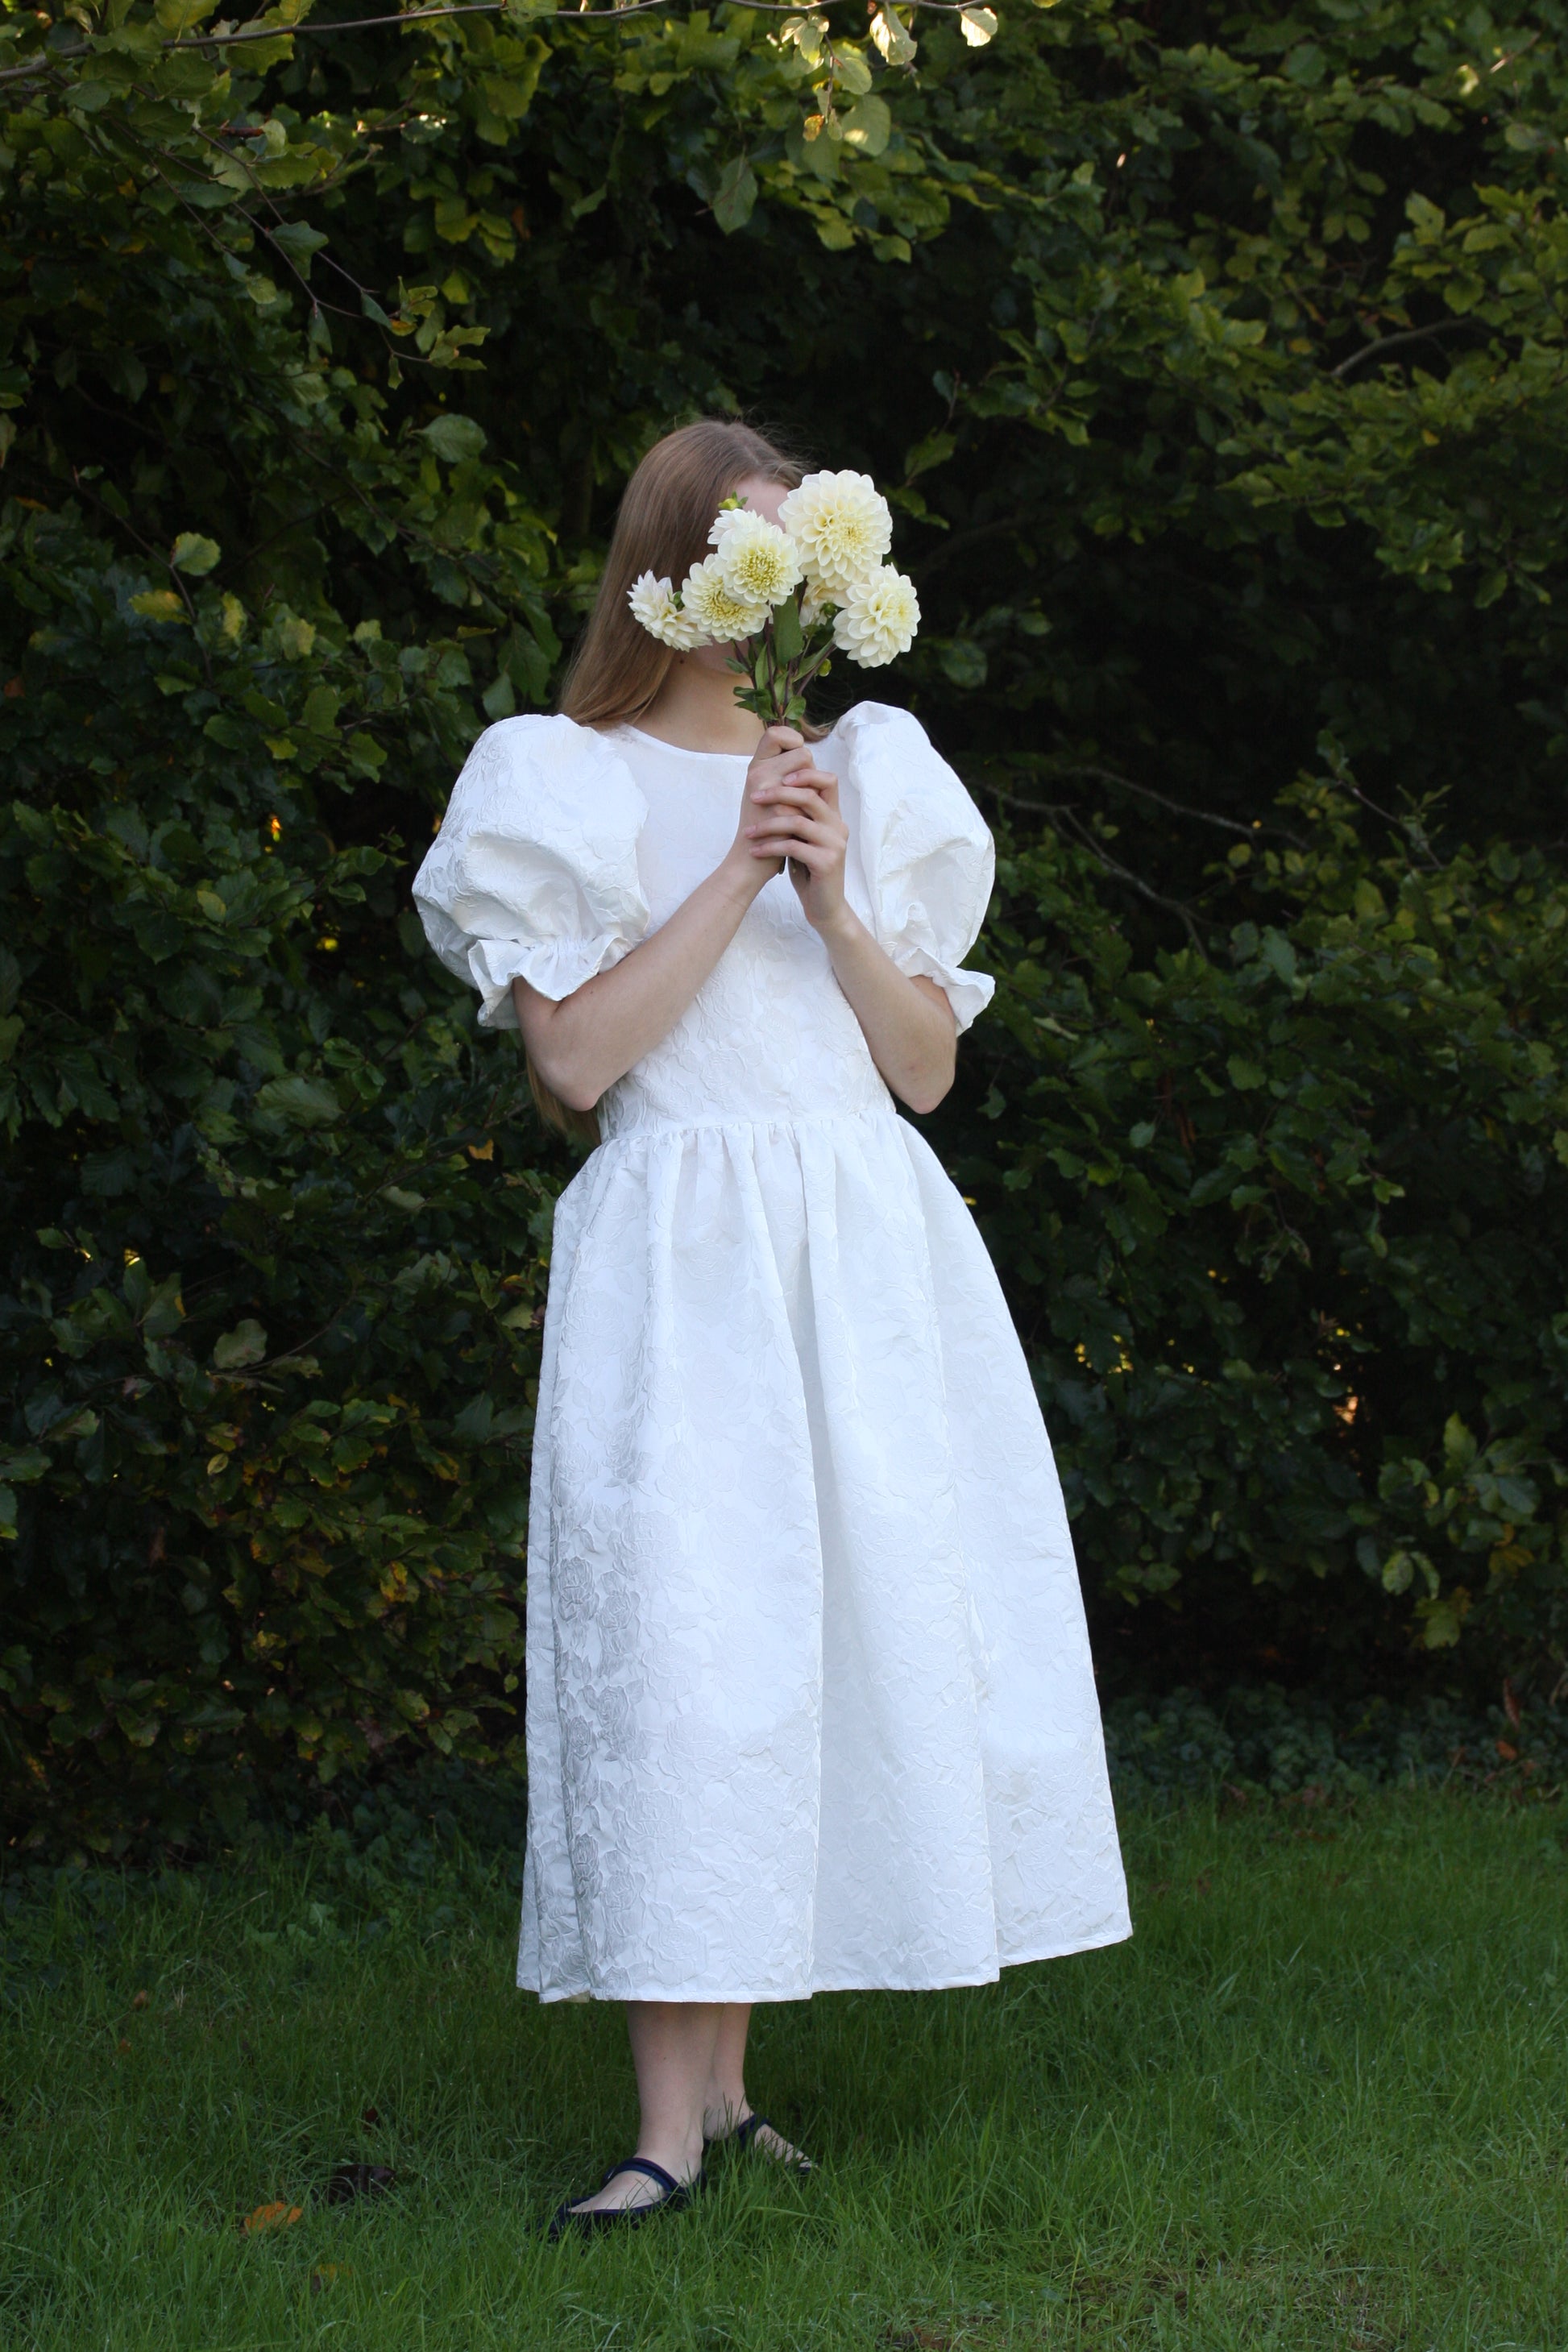 Full length image of white jacquard floral wedding dress with large puff sleeves